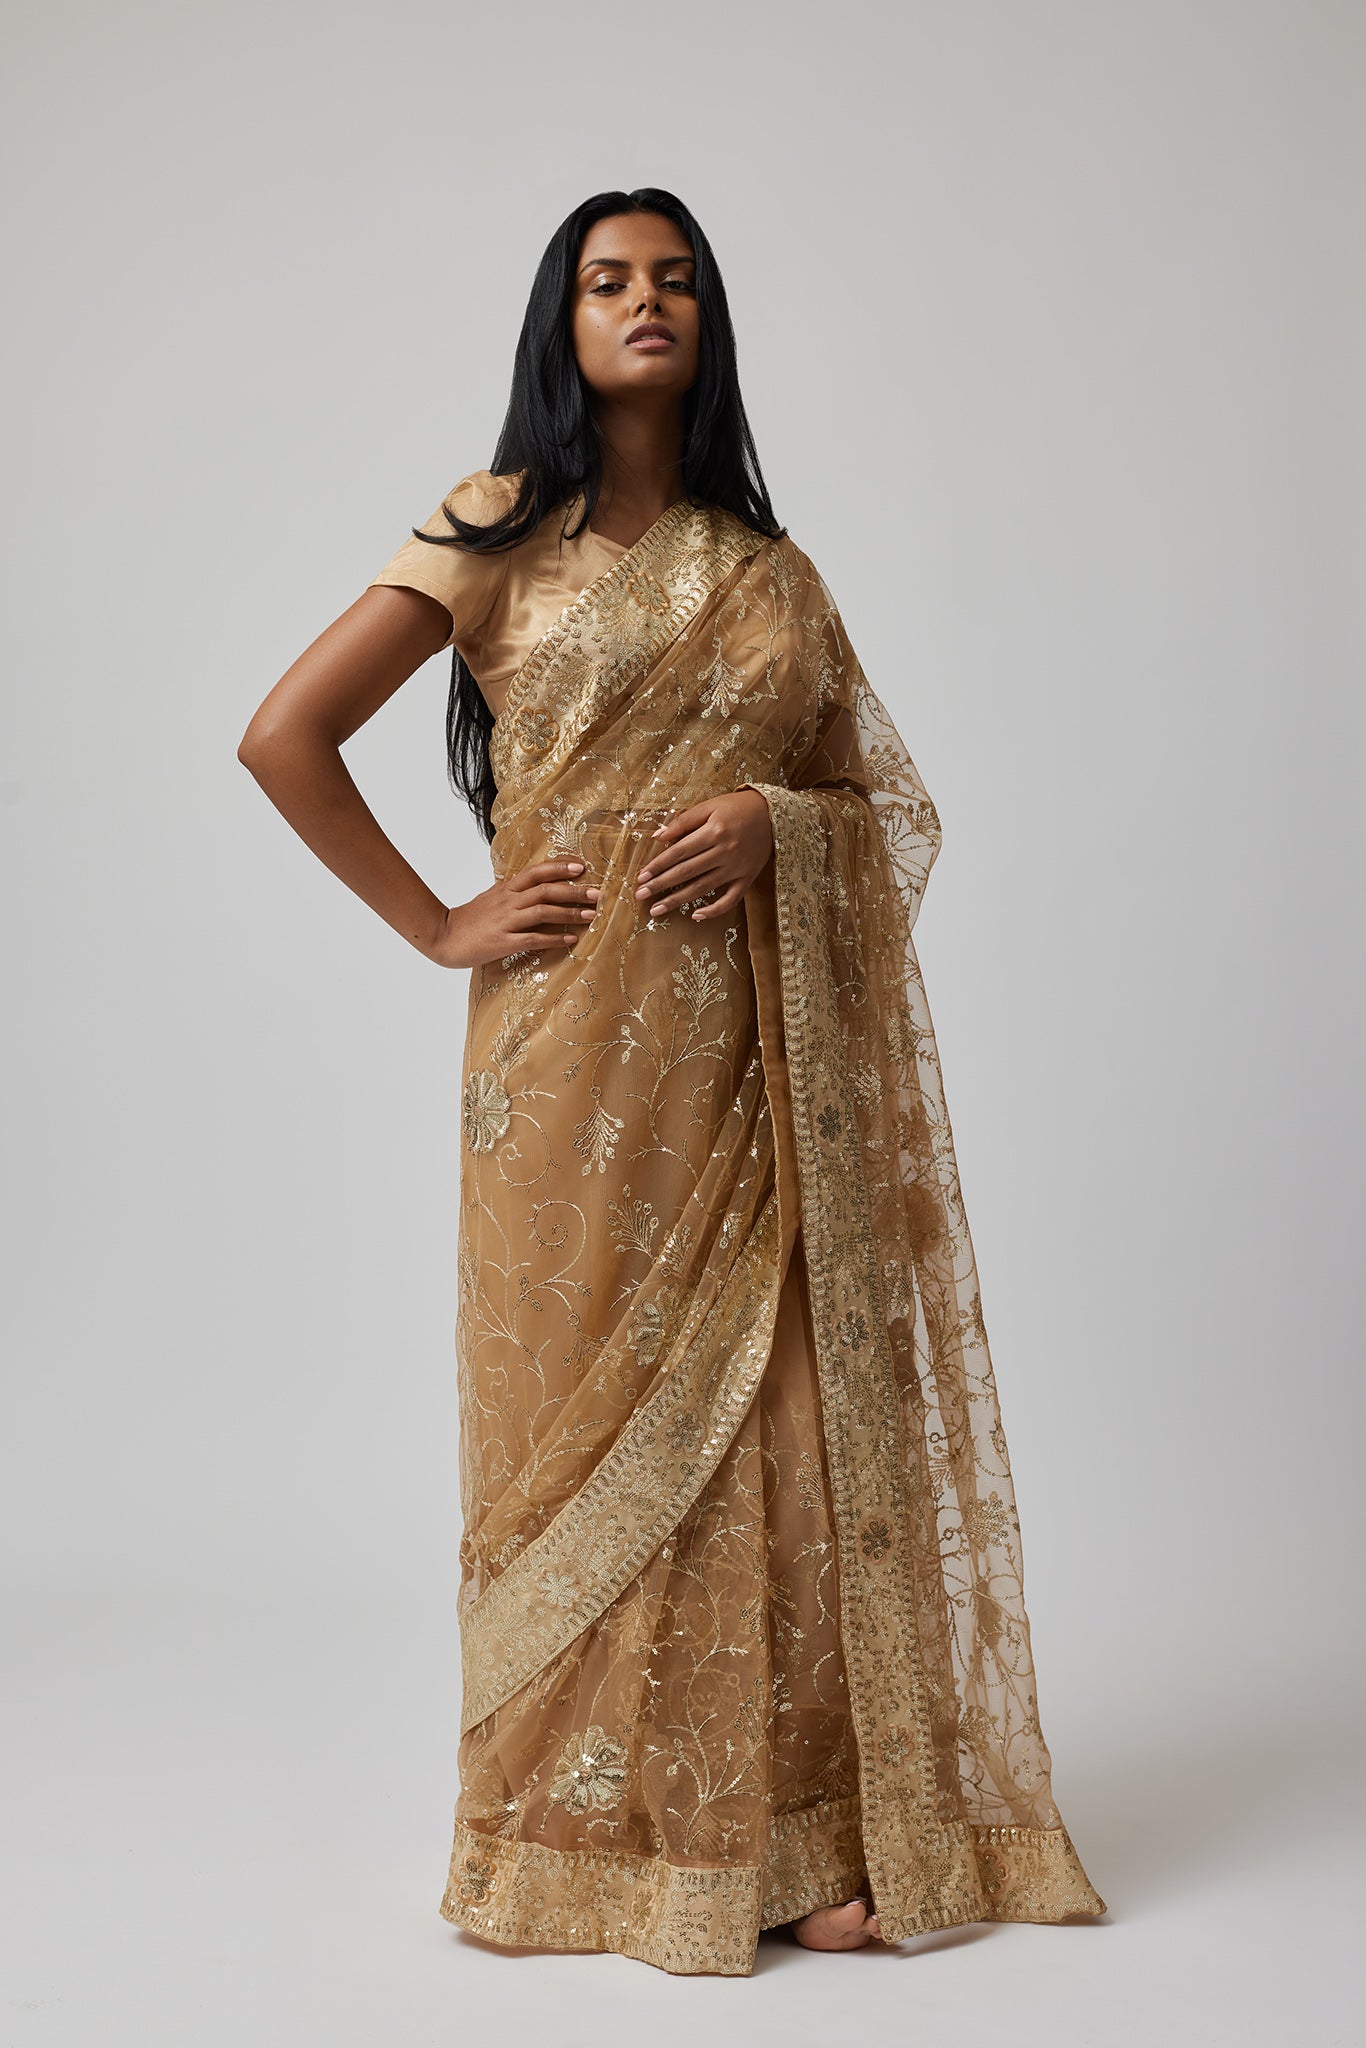 The Dimple Saree from the front